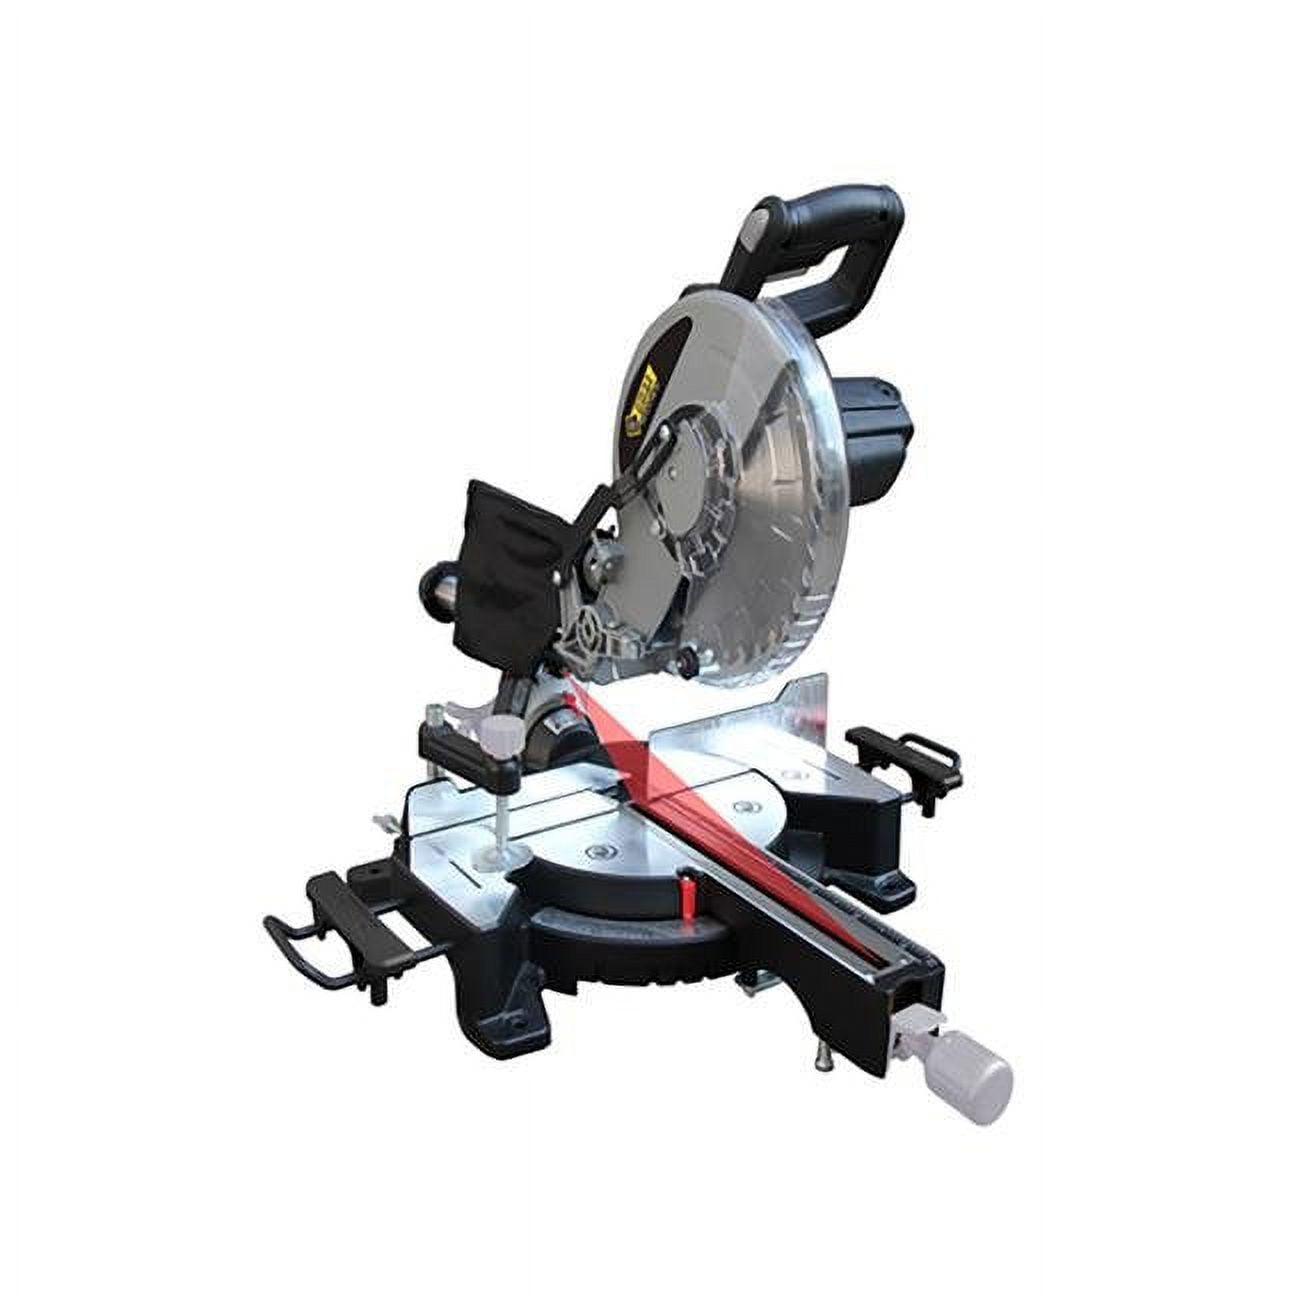 2006395 10 in. 15A 5000 RPM  Corded Compound Miter Saw Bare Tool -  Steel Grip